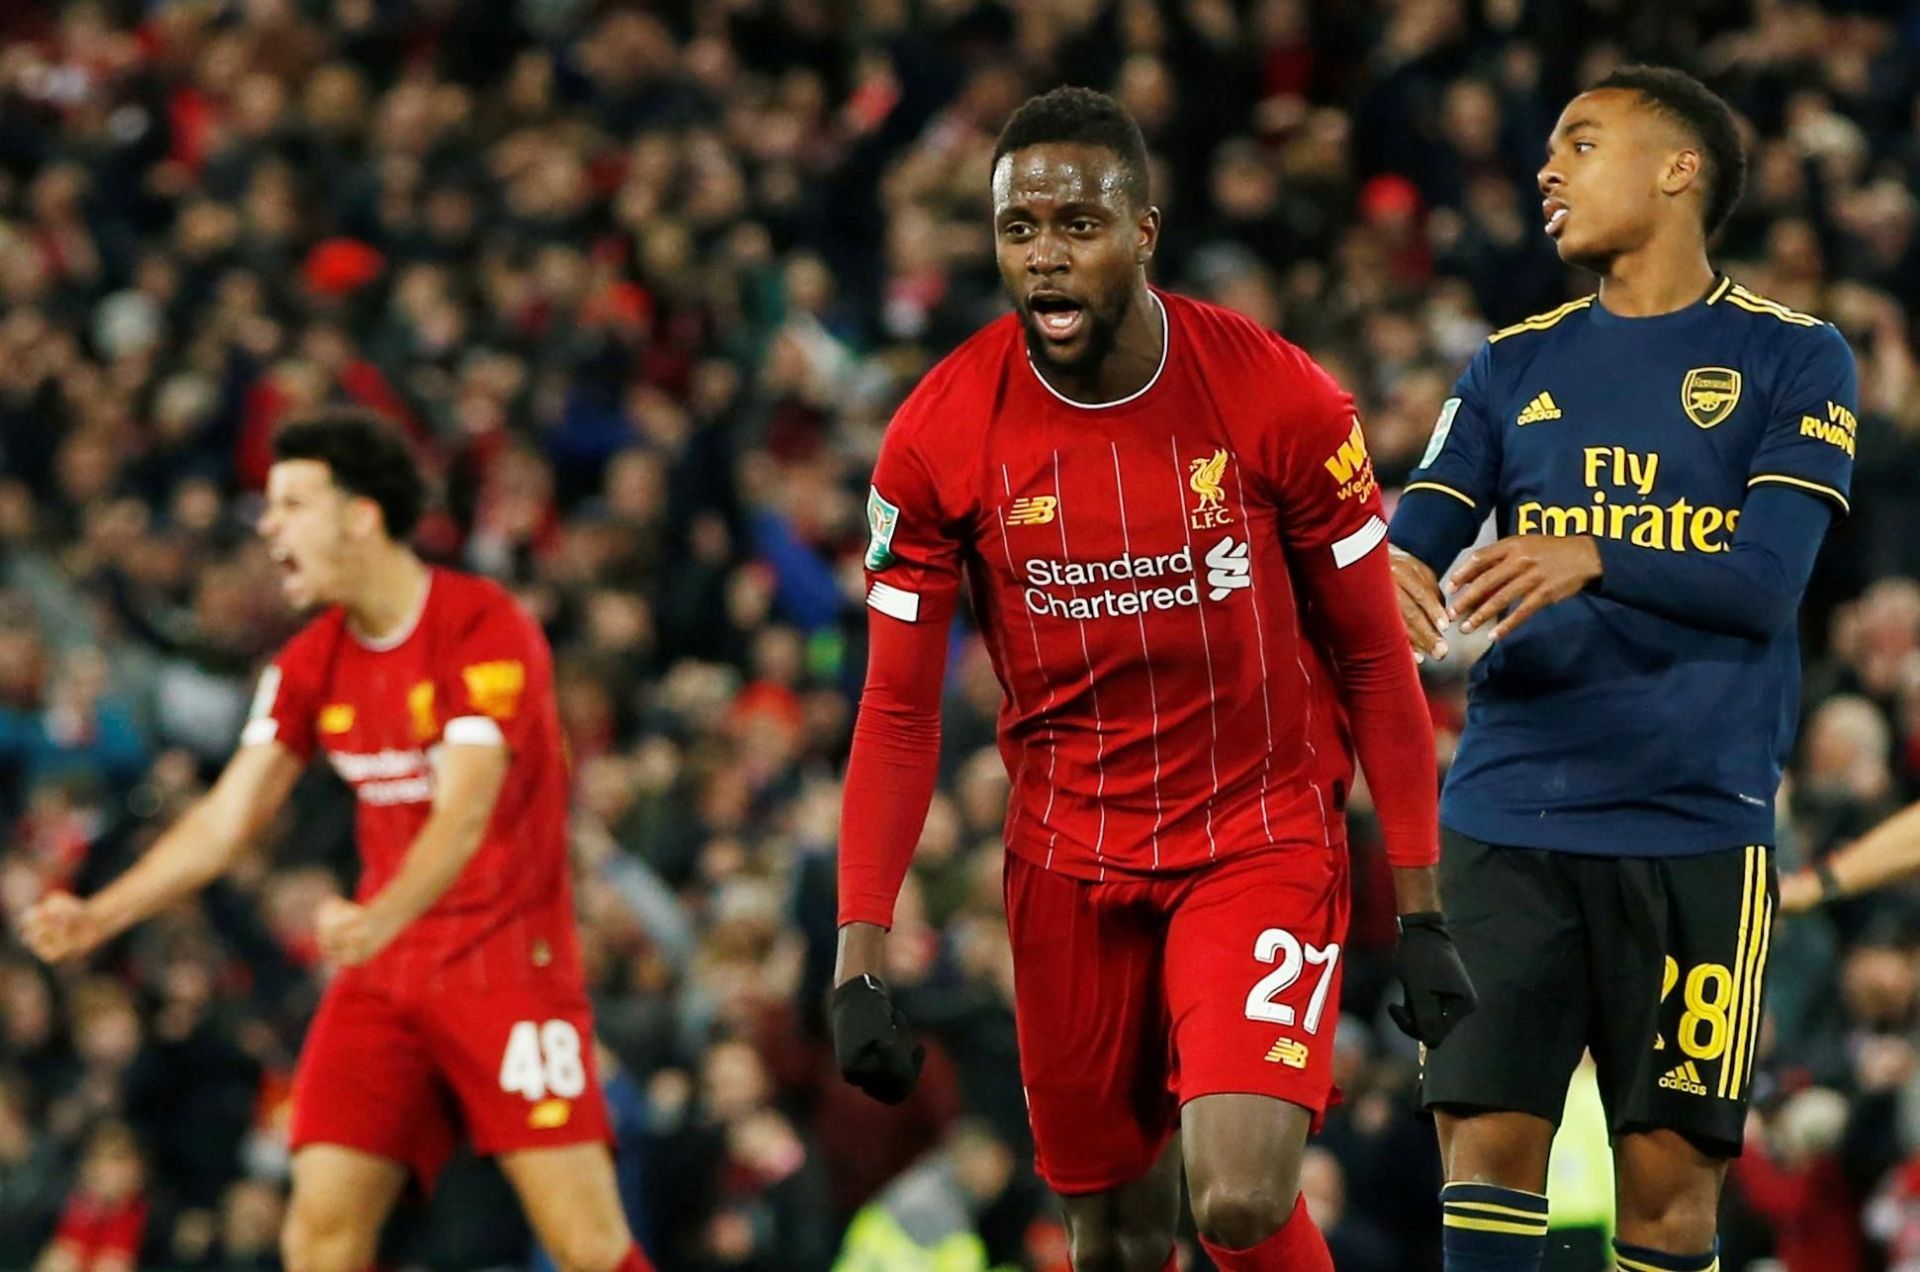 Divock Origi was the star of a historic EFL Cup game in 2019.